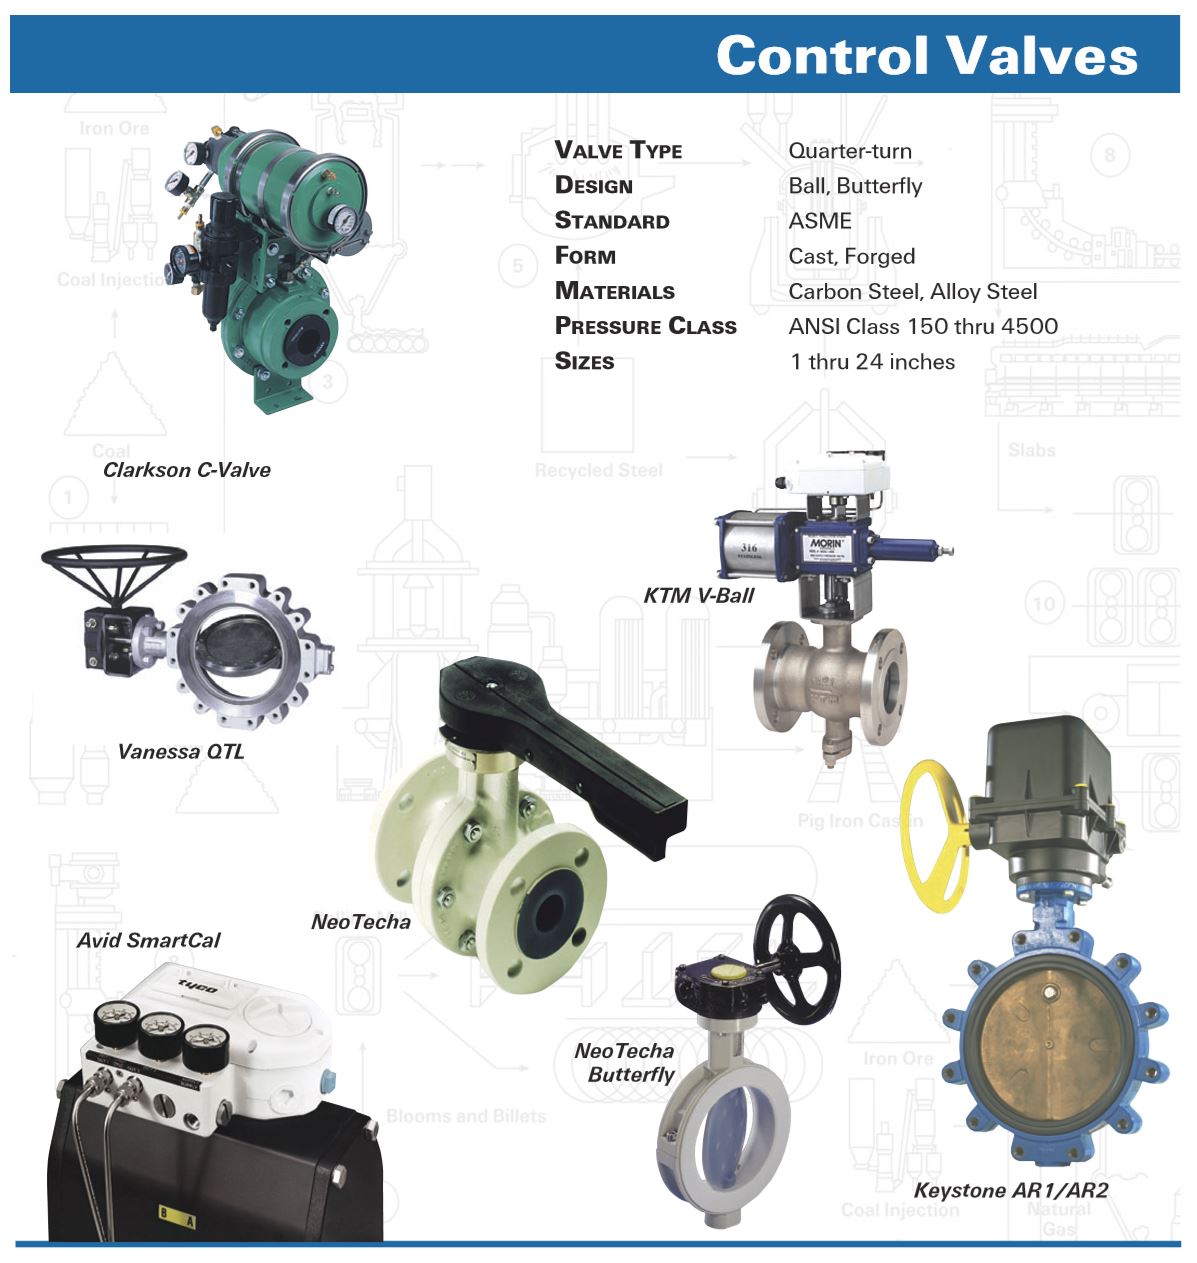 E:\MINECO\WEBSITE_MINECO\5_POWER INDUSTRY_08 pages\2. Control valve-01page\Capture2.JPG